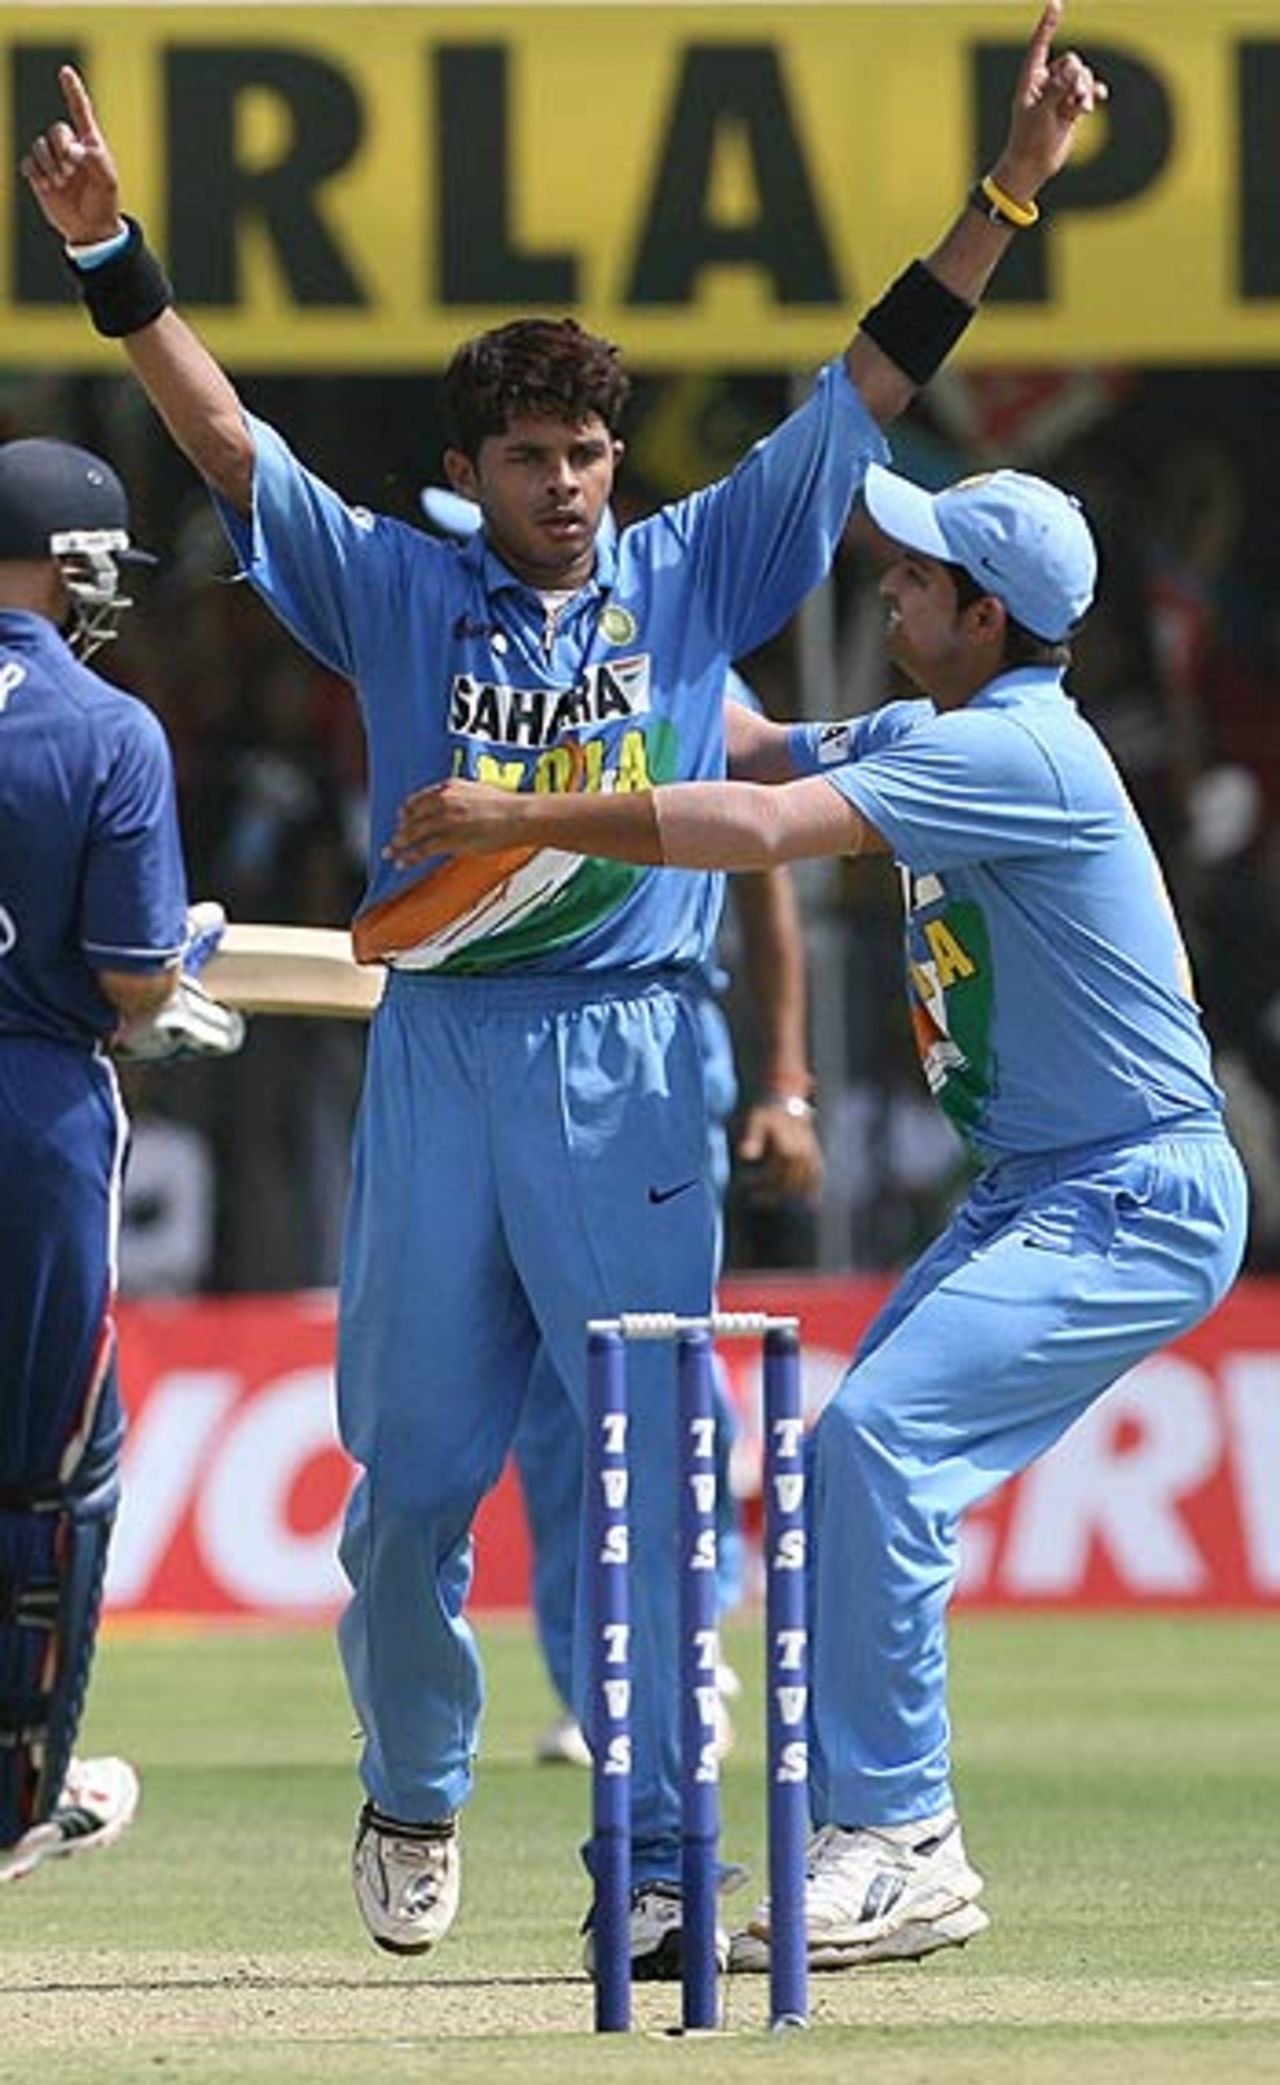 Sreesanth celebrates one of his six wickets, India v England, 7th ODI, Indore, April 15 2006